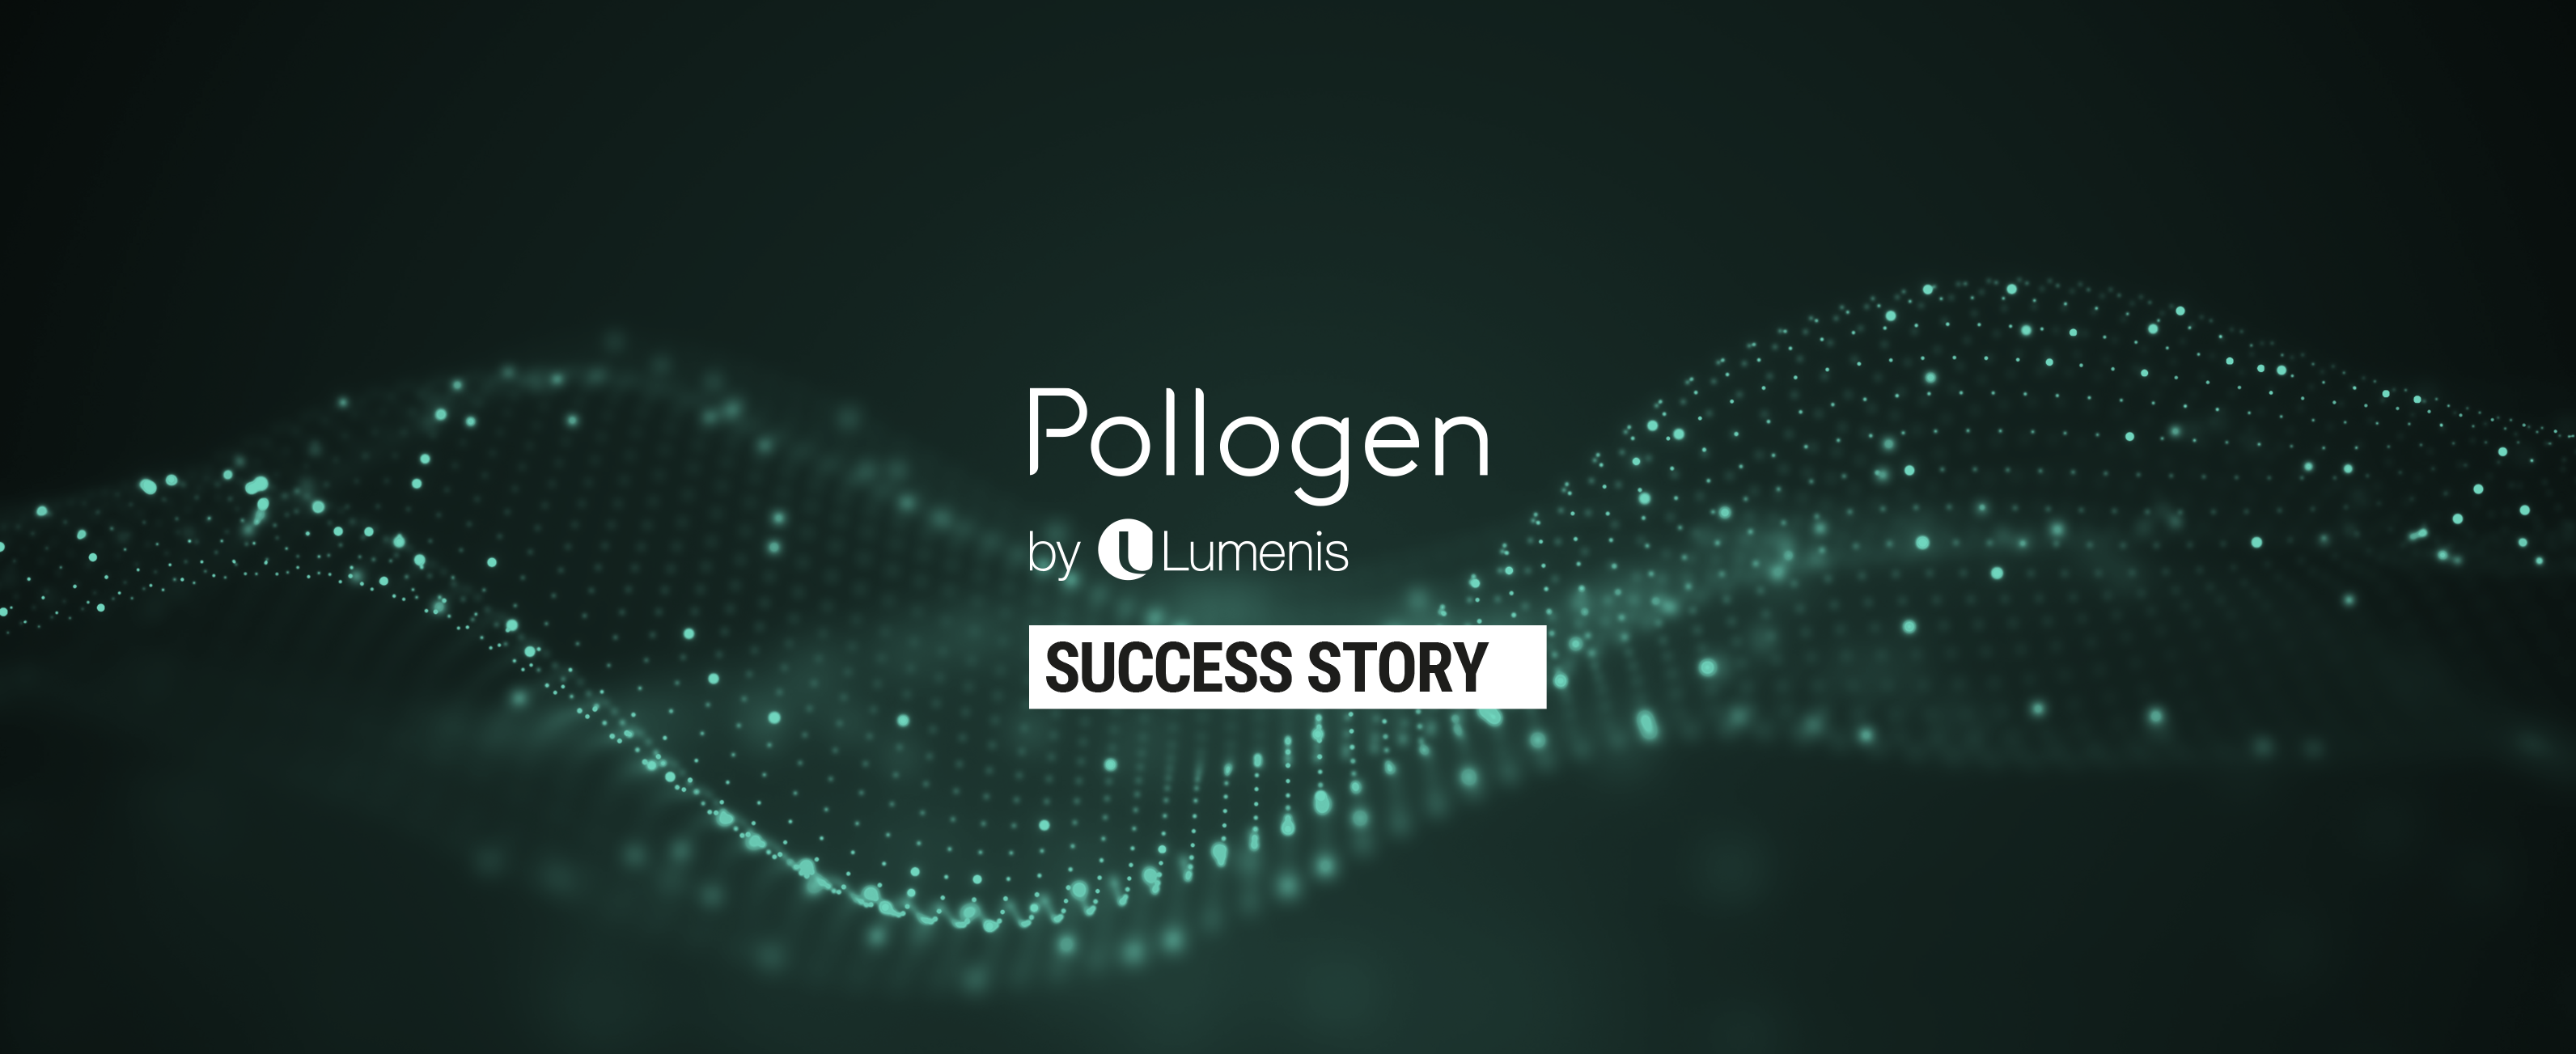 Pollogen - Holistic Brand Protection At Its Best